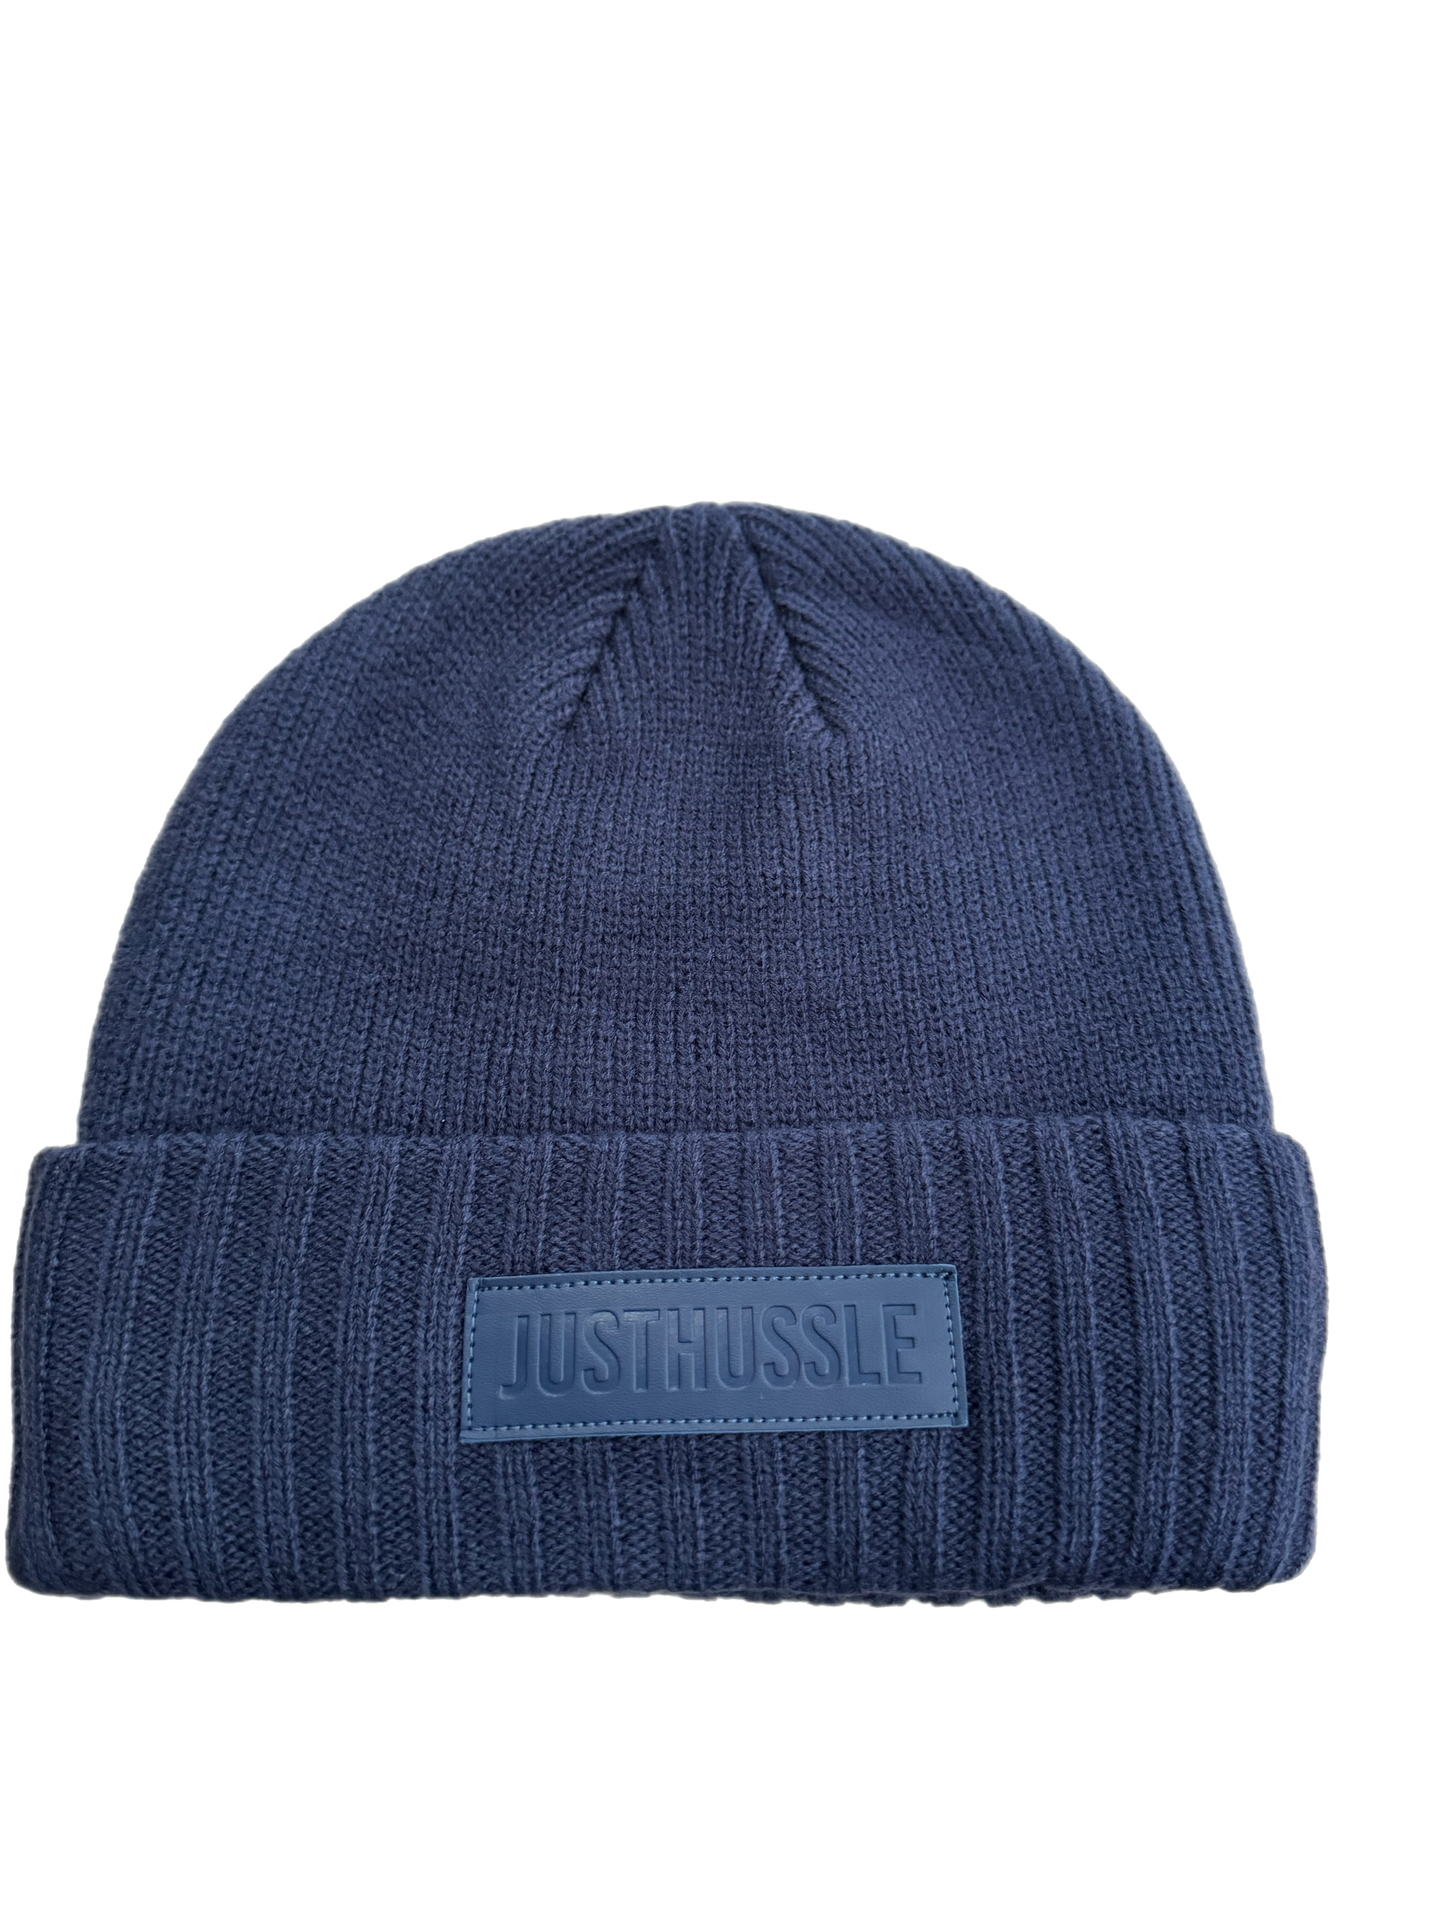 Copy of Copy of JUST HUSSLE BEANIE (BLUE)